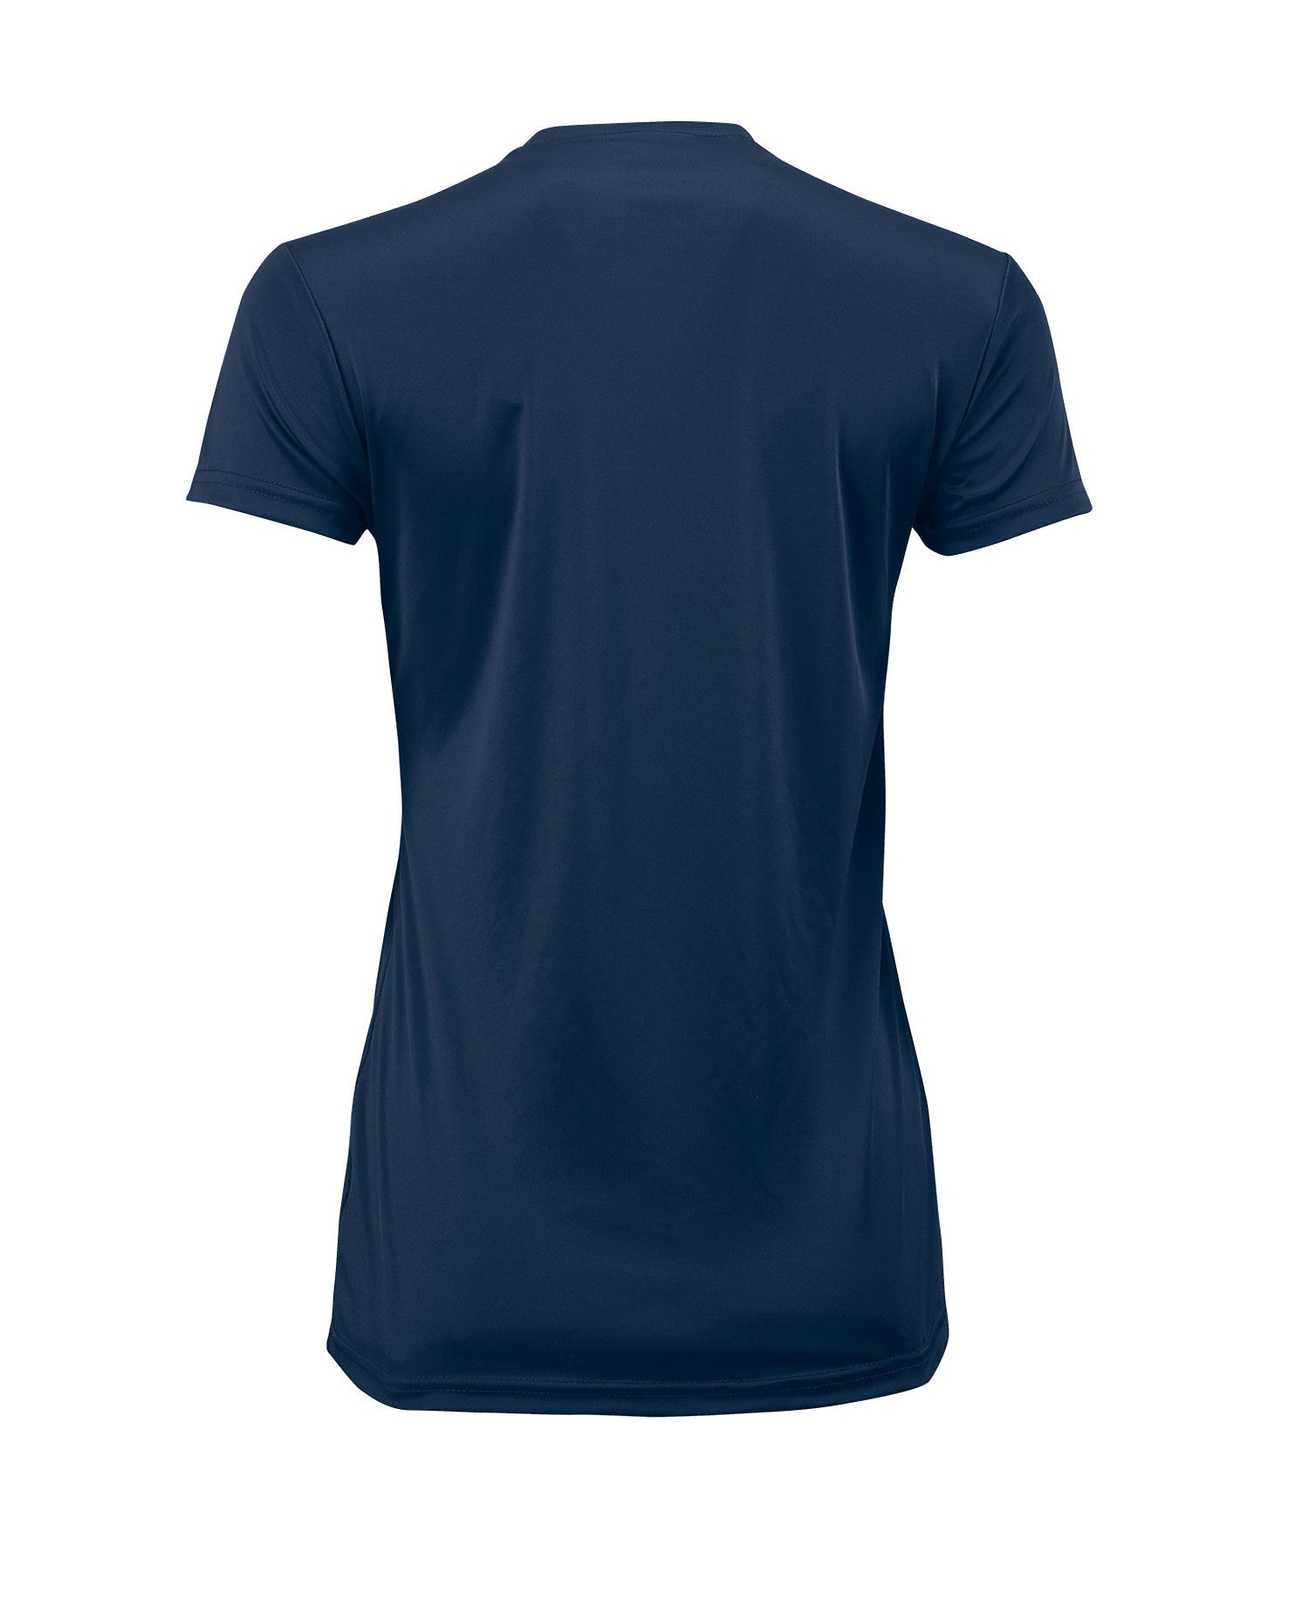 Paragon 204 Ladies Performance Tee - Navy - HIT a Double